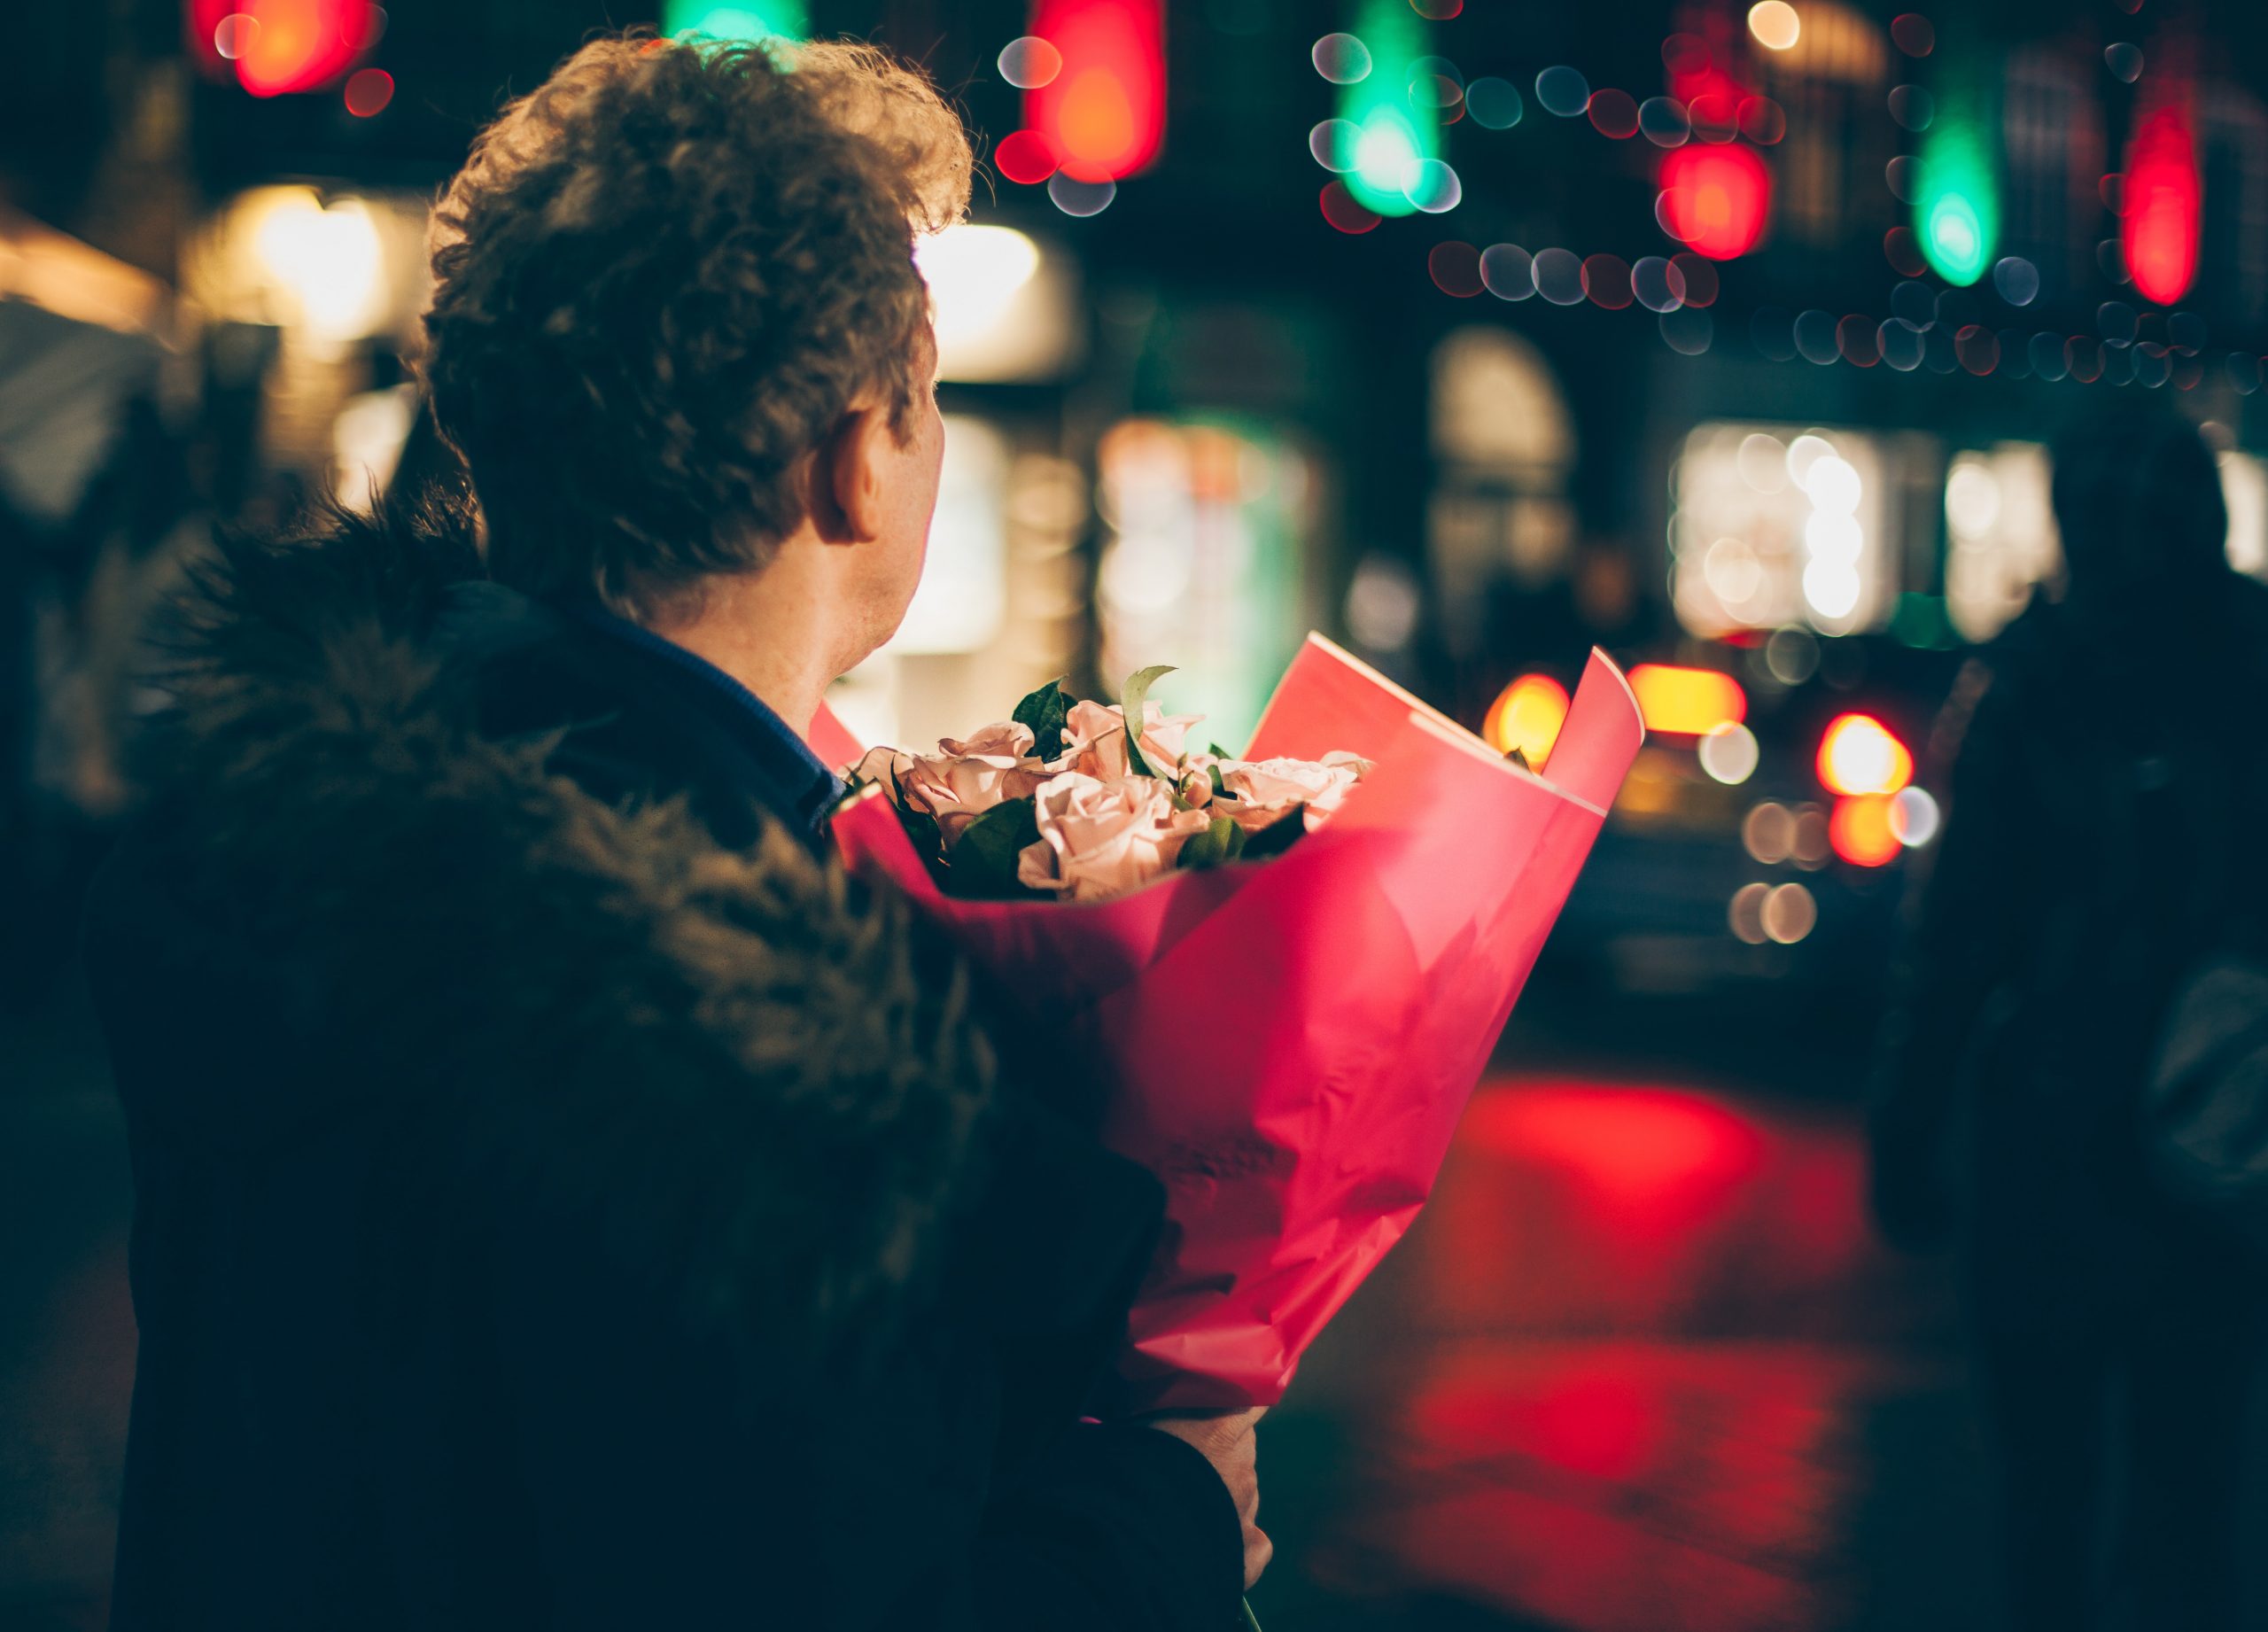 A guy holding flowers - Valentine's Day.